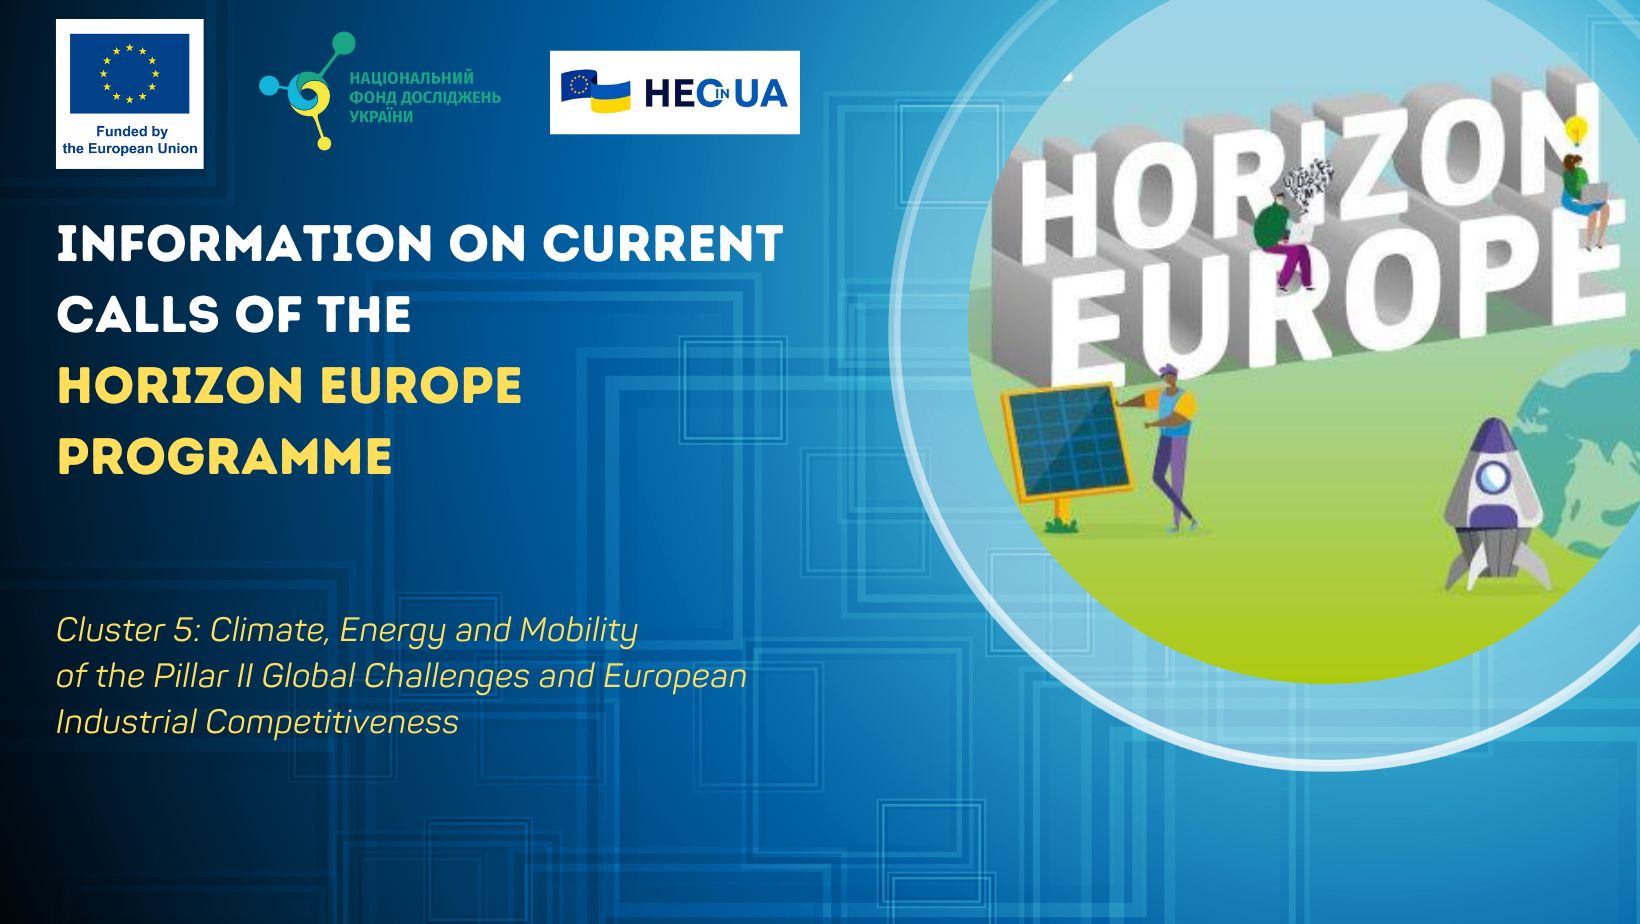 Information on open calls under the Cluster 5: Climate, Energy and Mobility within the Horizon Europe Programme